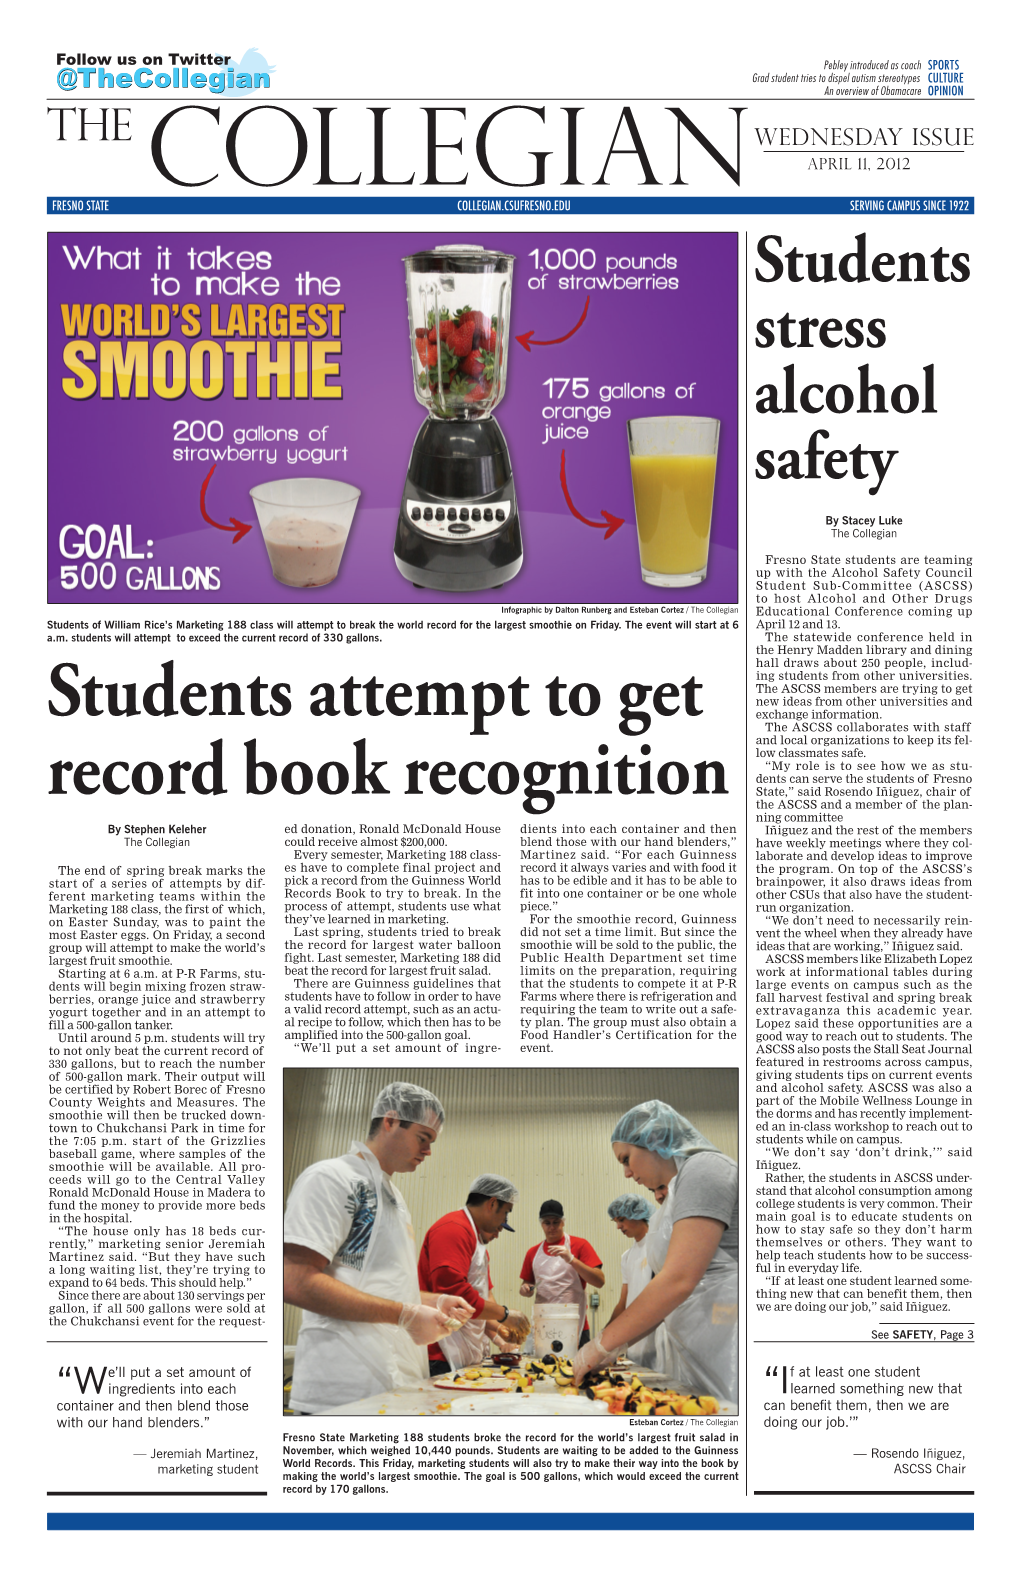 Students Attempt to Get Record Book Recognition